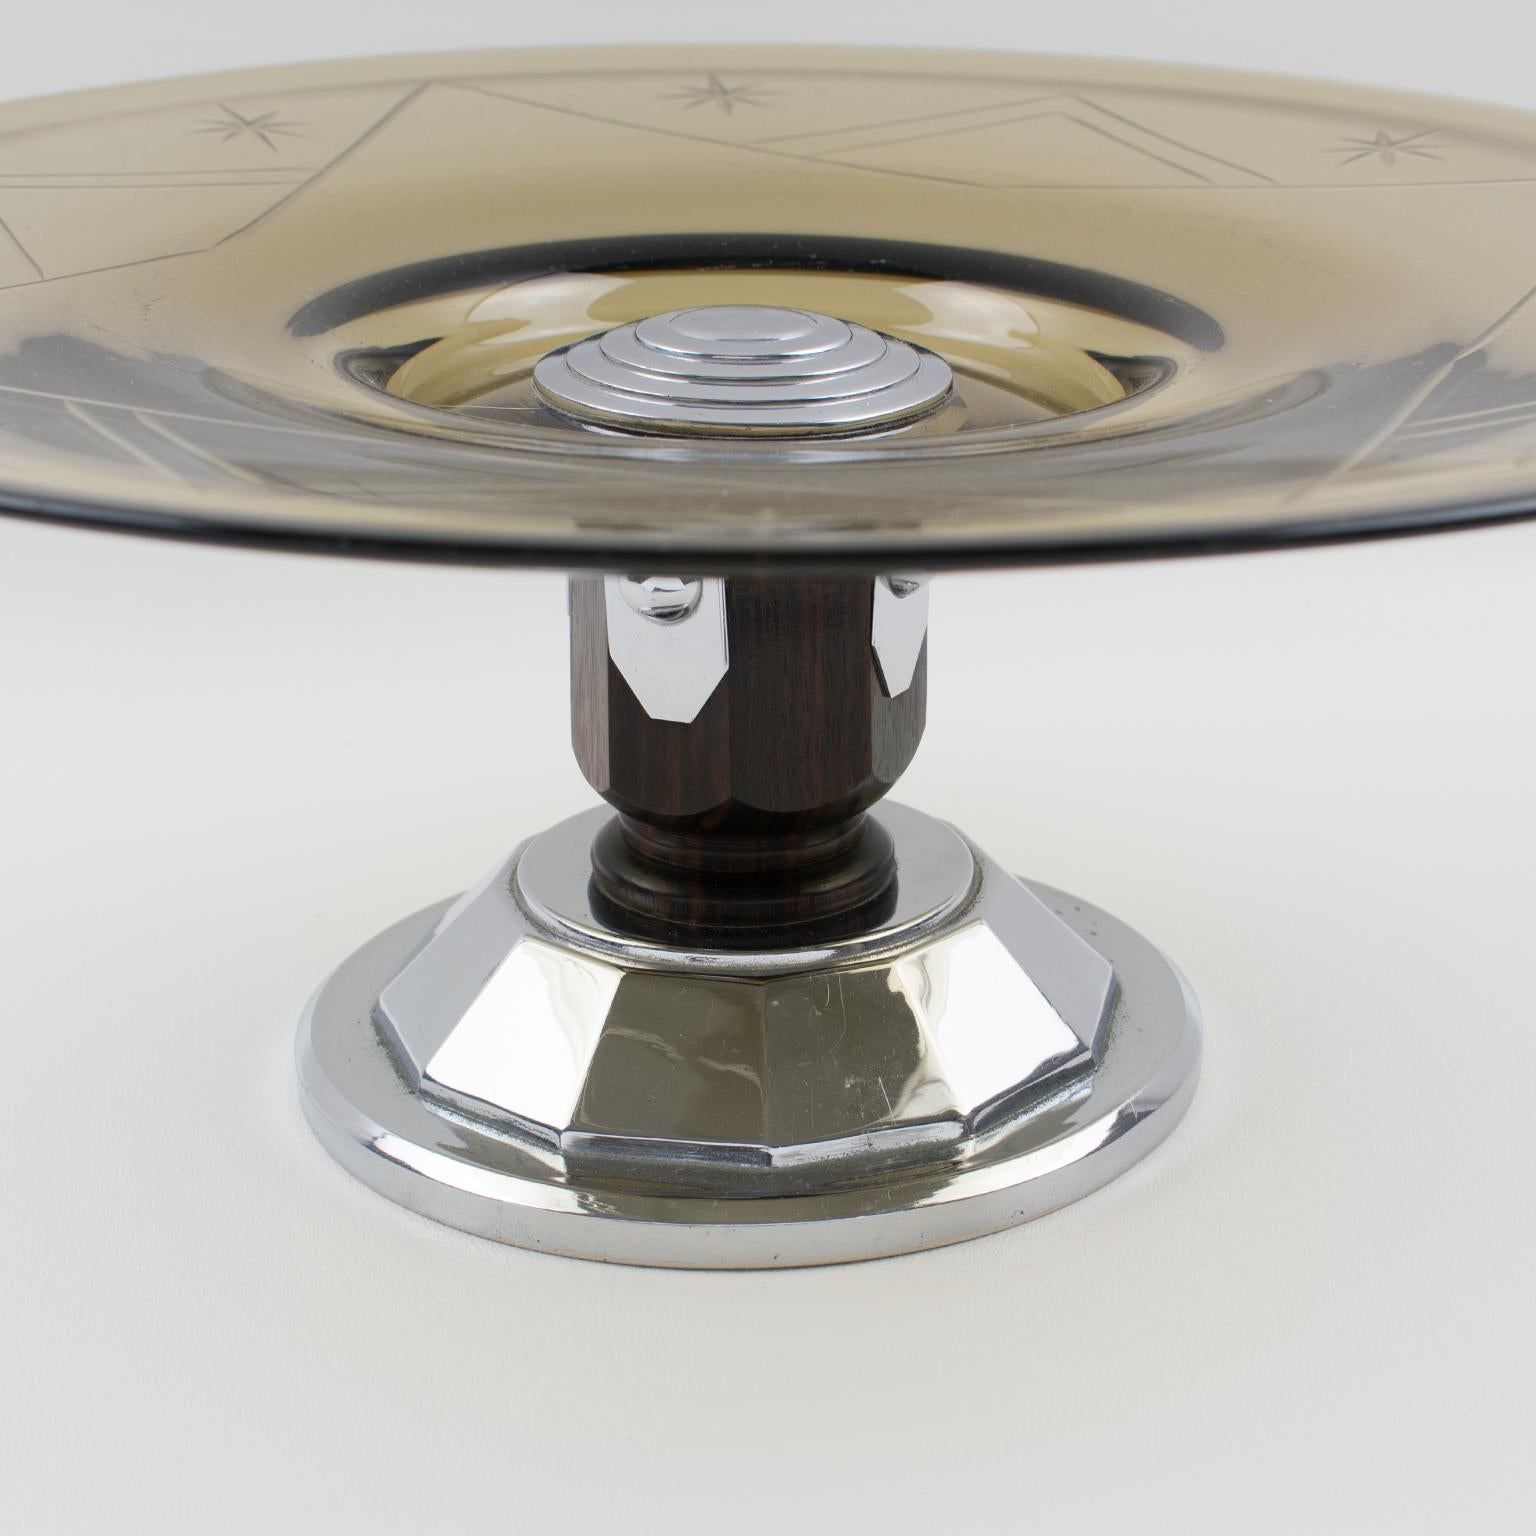 Mid-20th Century Art Deco Glass, Macassar Wood and Chrome Centerpiece Bowl, France 1930s For Sale